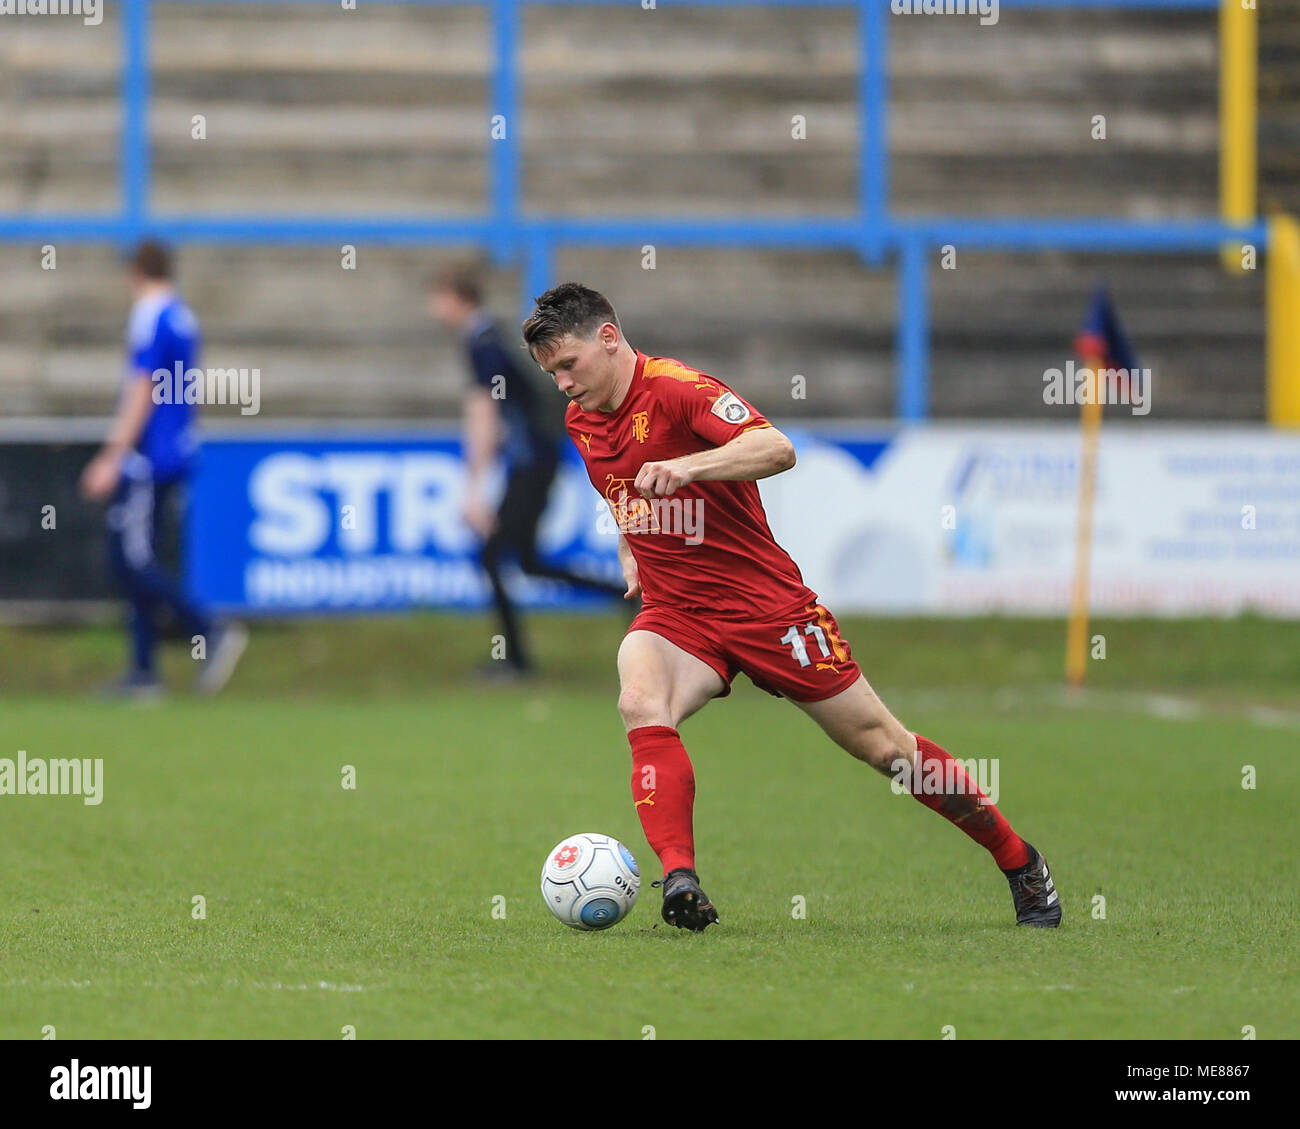 Halifax, UK. 21st April, 2018.  National League, Halifax Town v Tranmere Rovers; Connor Jennings of Tranmere Rovers Credit: News Images /Alamy Live News Stock Photo